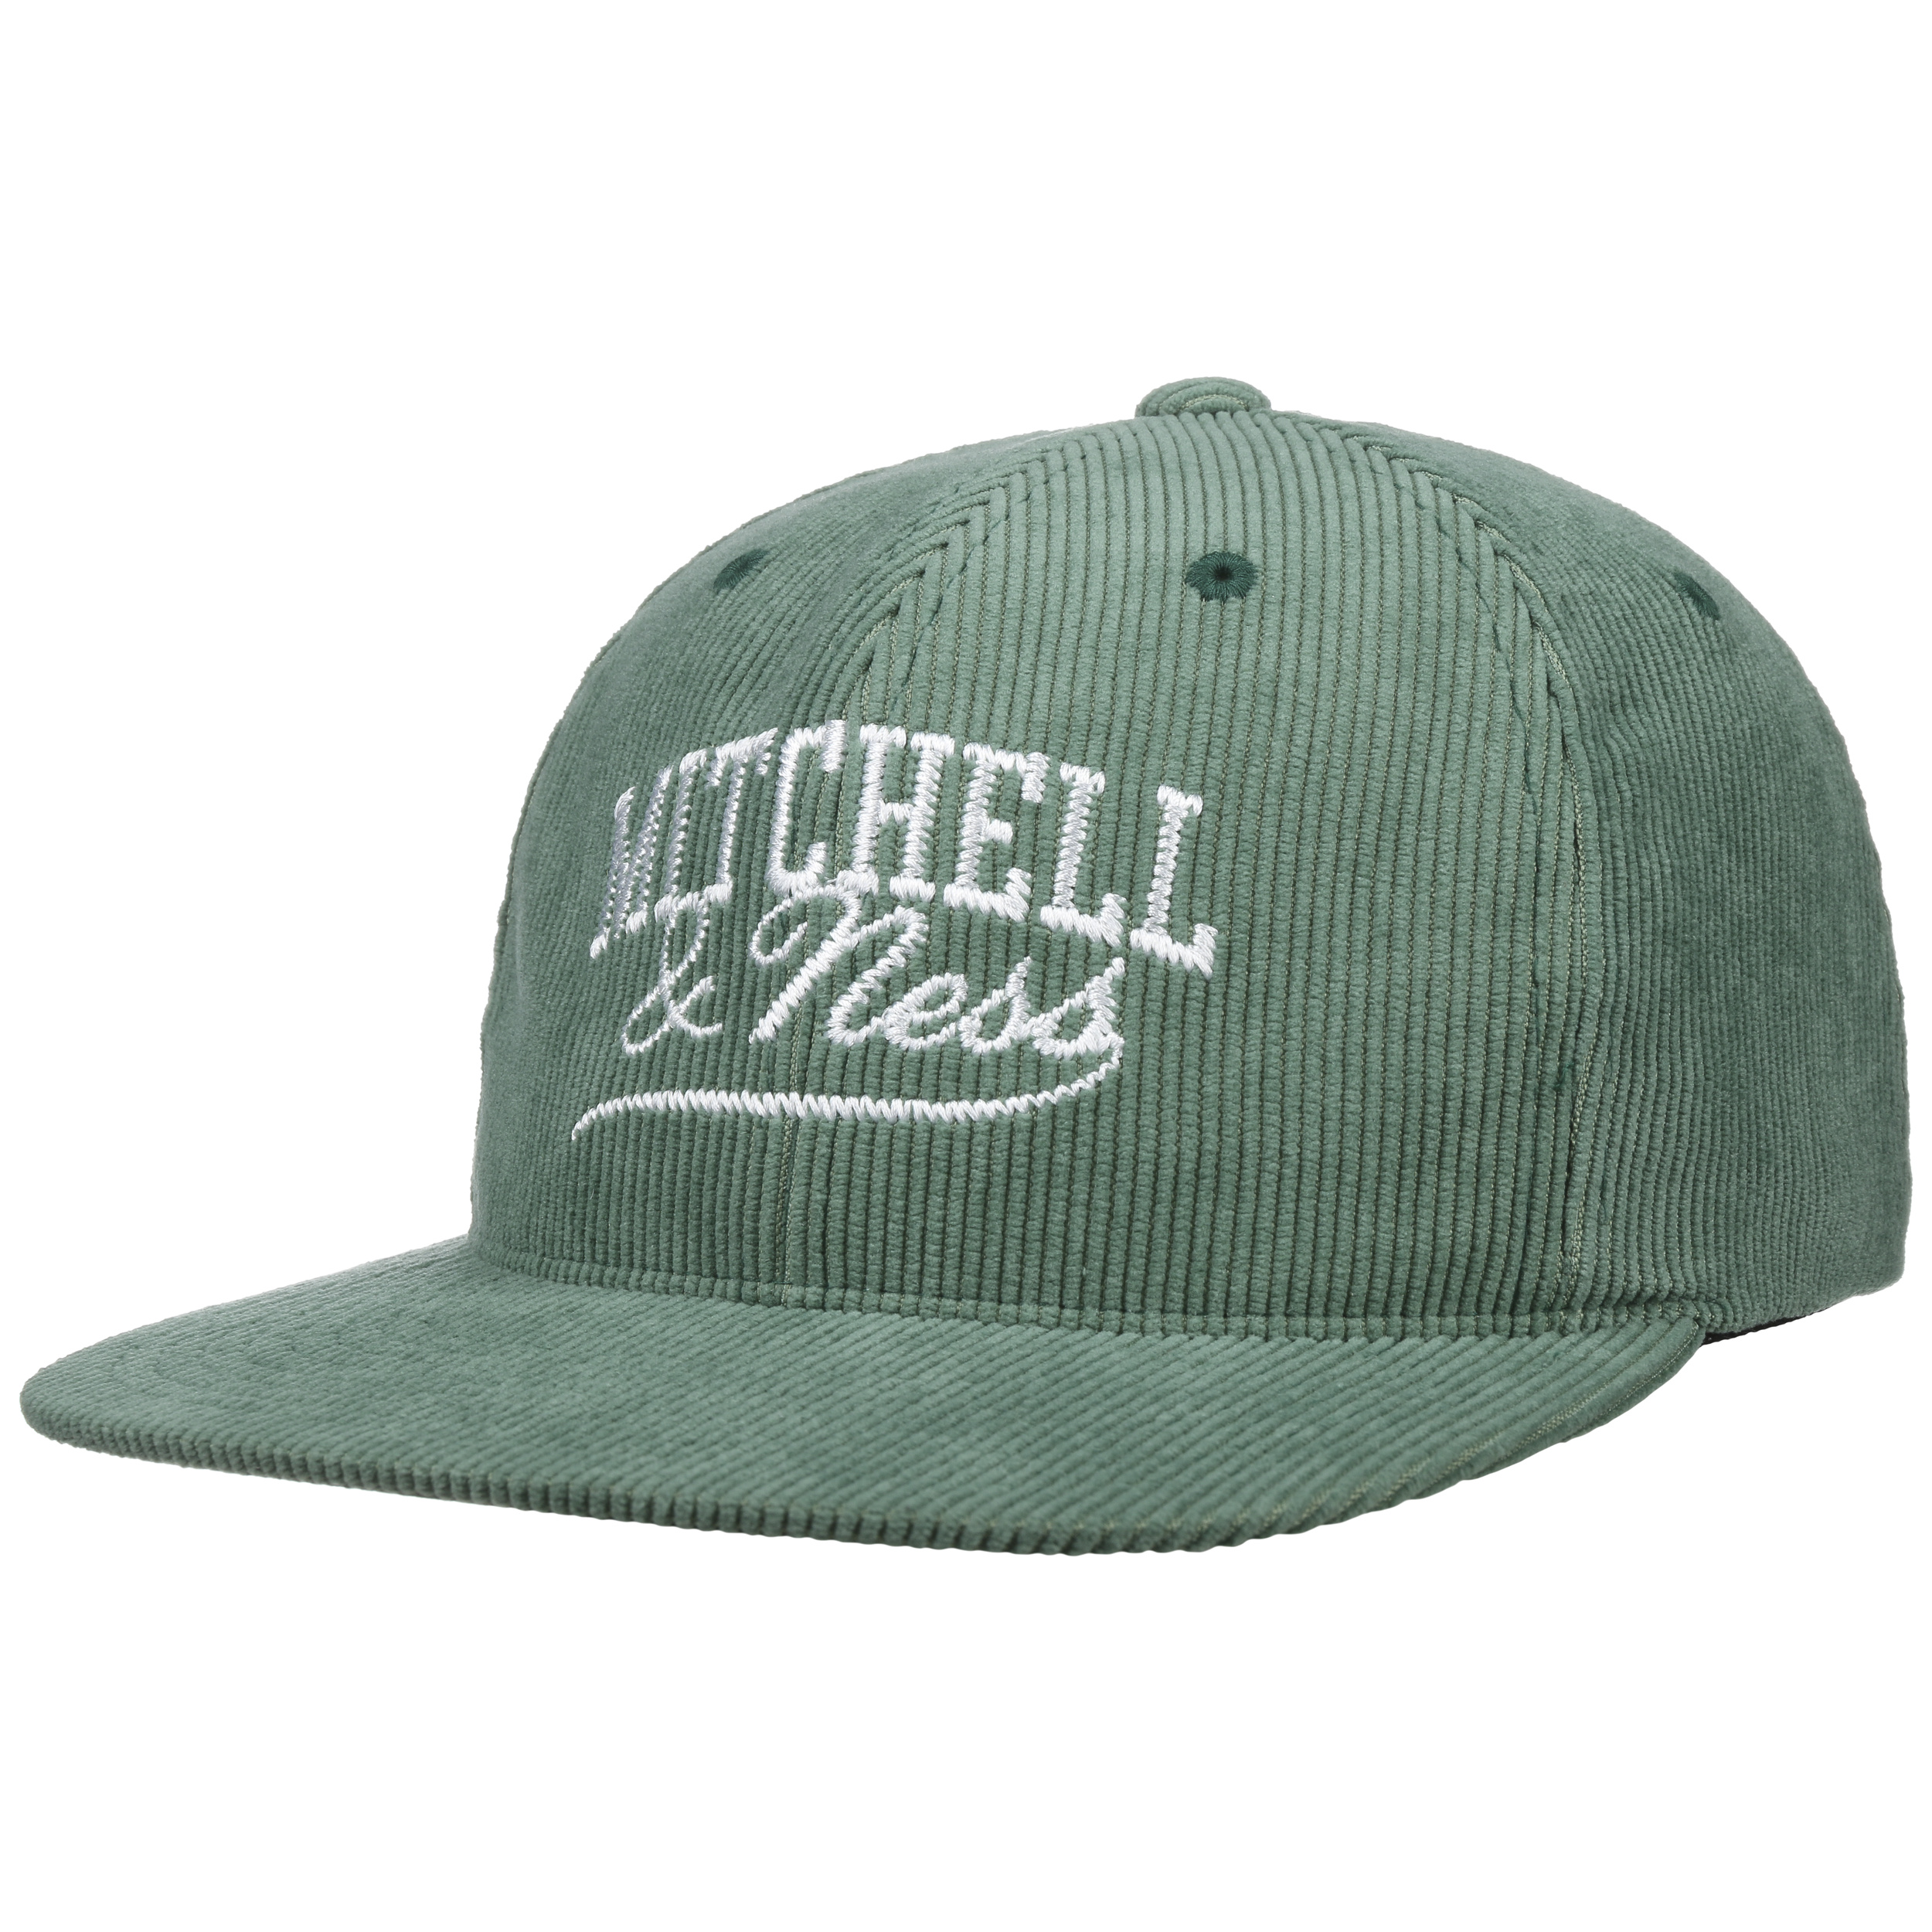 Summer Cord Brand Cap by Mitchell & Ness - 36,95 €